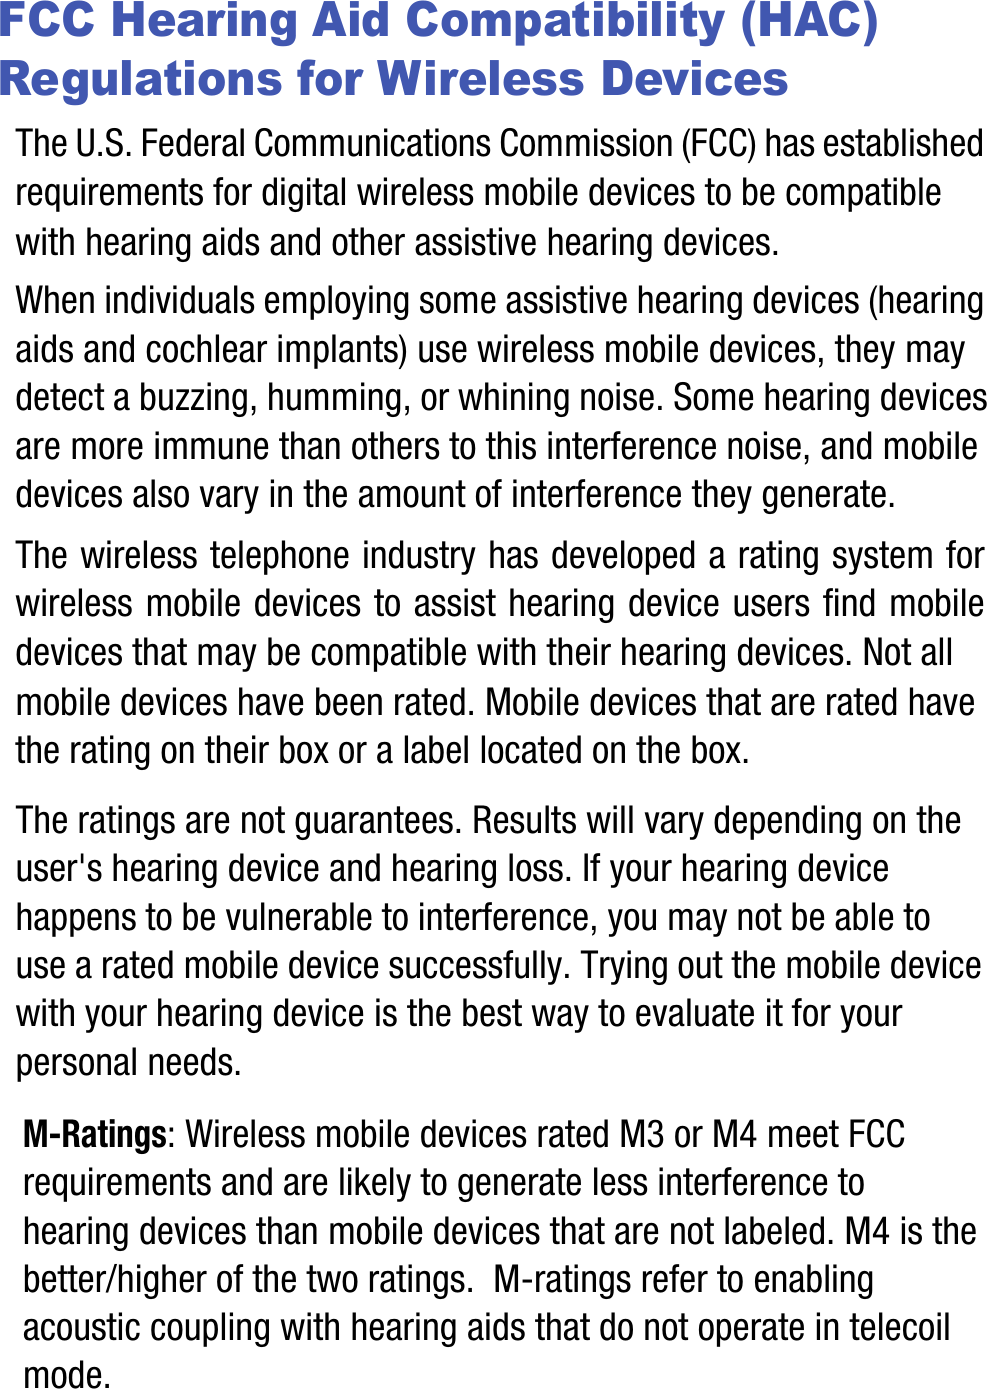 FCC Hearing Aid Compatibility (HAC) Regulations for Wireless DevicesThe U.S. Federal Communications Commission (FCC) has established requirements for digital wireless mobile devices to be compatible with hearing aids and other assistive hearing devices.When individuals employing some assistive hearing devices (hearing aids and cochlear implants) use wireless mobile devices, they may detect a buzzing, humming, or whining noise. Some hearing devices are more immune than others to this interference noise, and mobile devices also vary in the amount of interference they generate.The wireless telephone industry has developed a rating system for wireless mobile devices to assist hearing device users find mobile devices that may be compatible with their hearing devices. Not all mobile devices have been rated. Mobile devices that are rated have the rating on their box or a label located on the box.The ratings are not guarantees. Results will vary depending on the user&apos;s hearing device and hearing loss. If your hearing device happens to be vulnerable to interference, you may not be able to use a rated mobile device successfully. Trying out the mobile device with your hearing device is the best way to evaluate it for your personal needs.M-Ratings: Wireless mobile devices rated M3 or M4 meet FCC requirements and are likely to generate less interference to hearing devices than mobile devices that are not labeled. M4 is the better/higher of the two ratings.  M-ratings refer to enabling acoustic coupling with hearing aids that do not operate in telecoil mode.